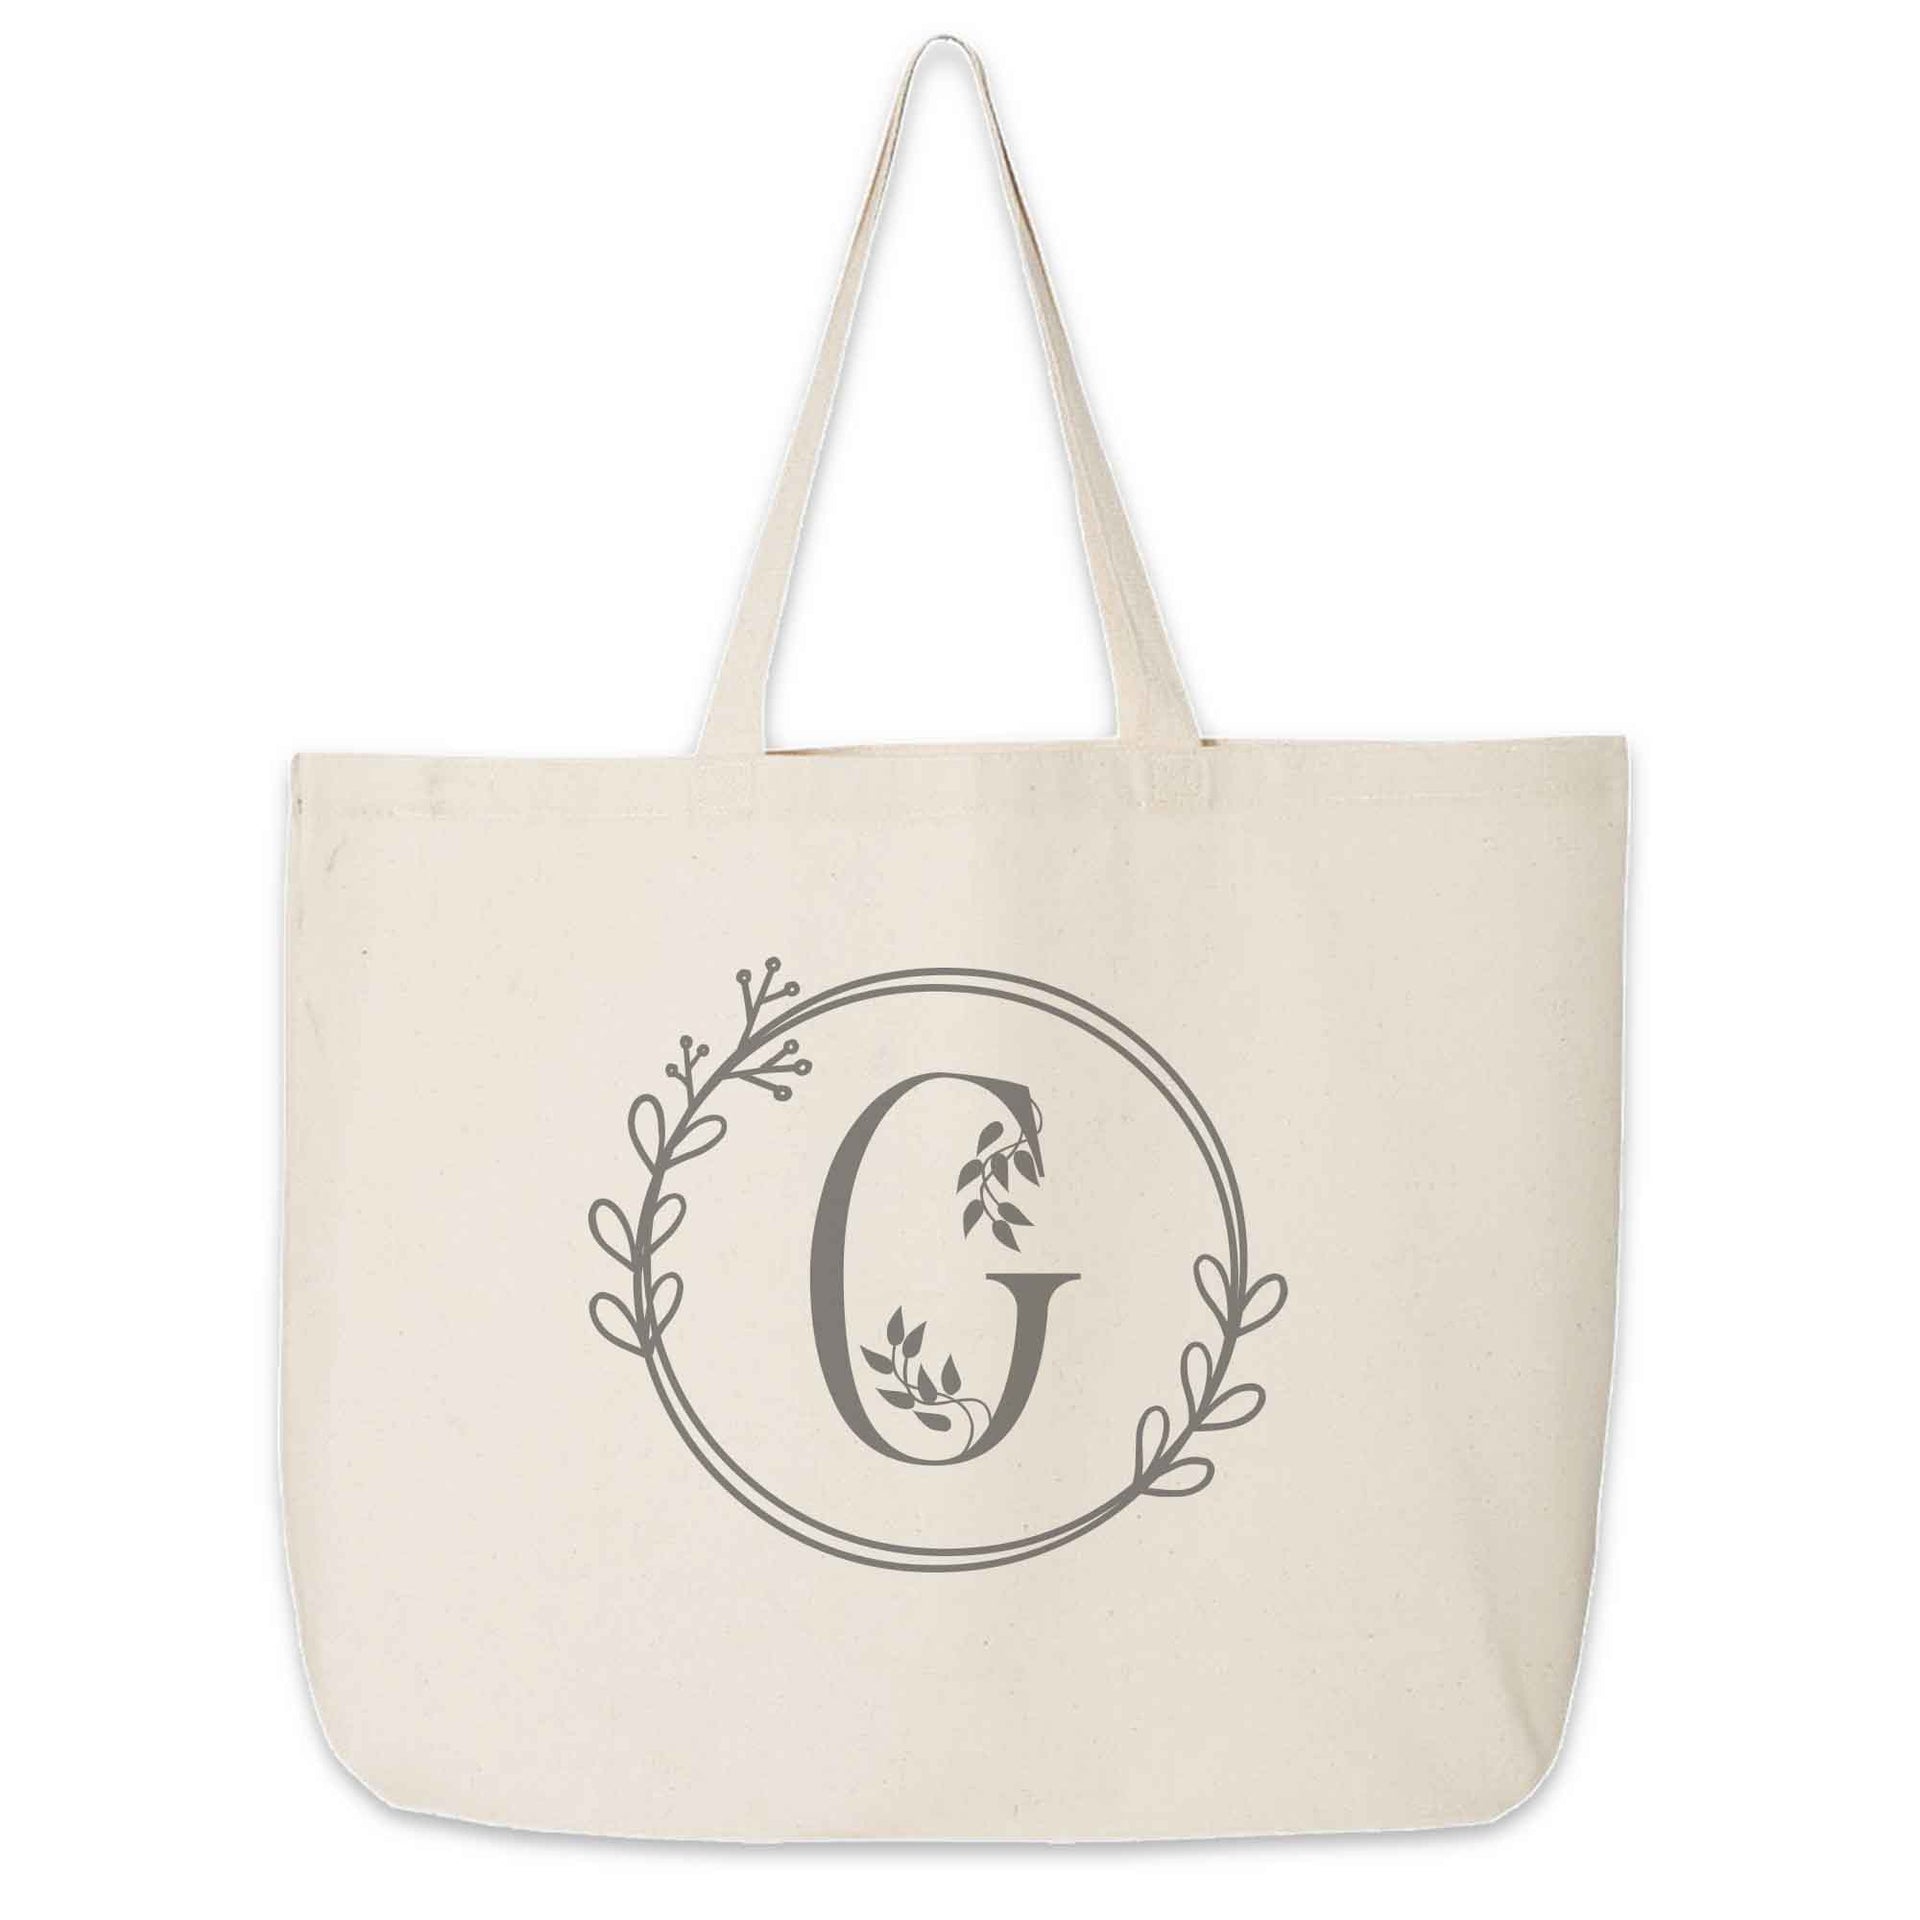 Tote Bag for Bridal Party Personalized with Floral Circle